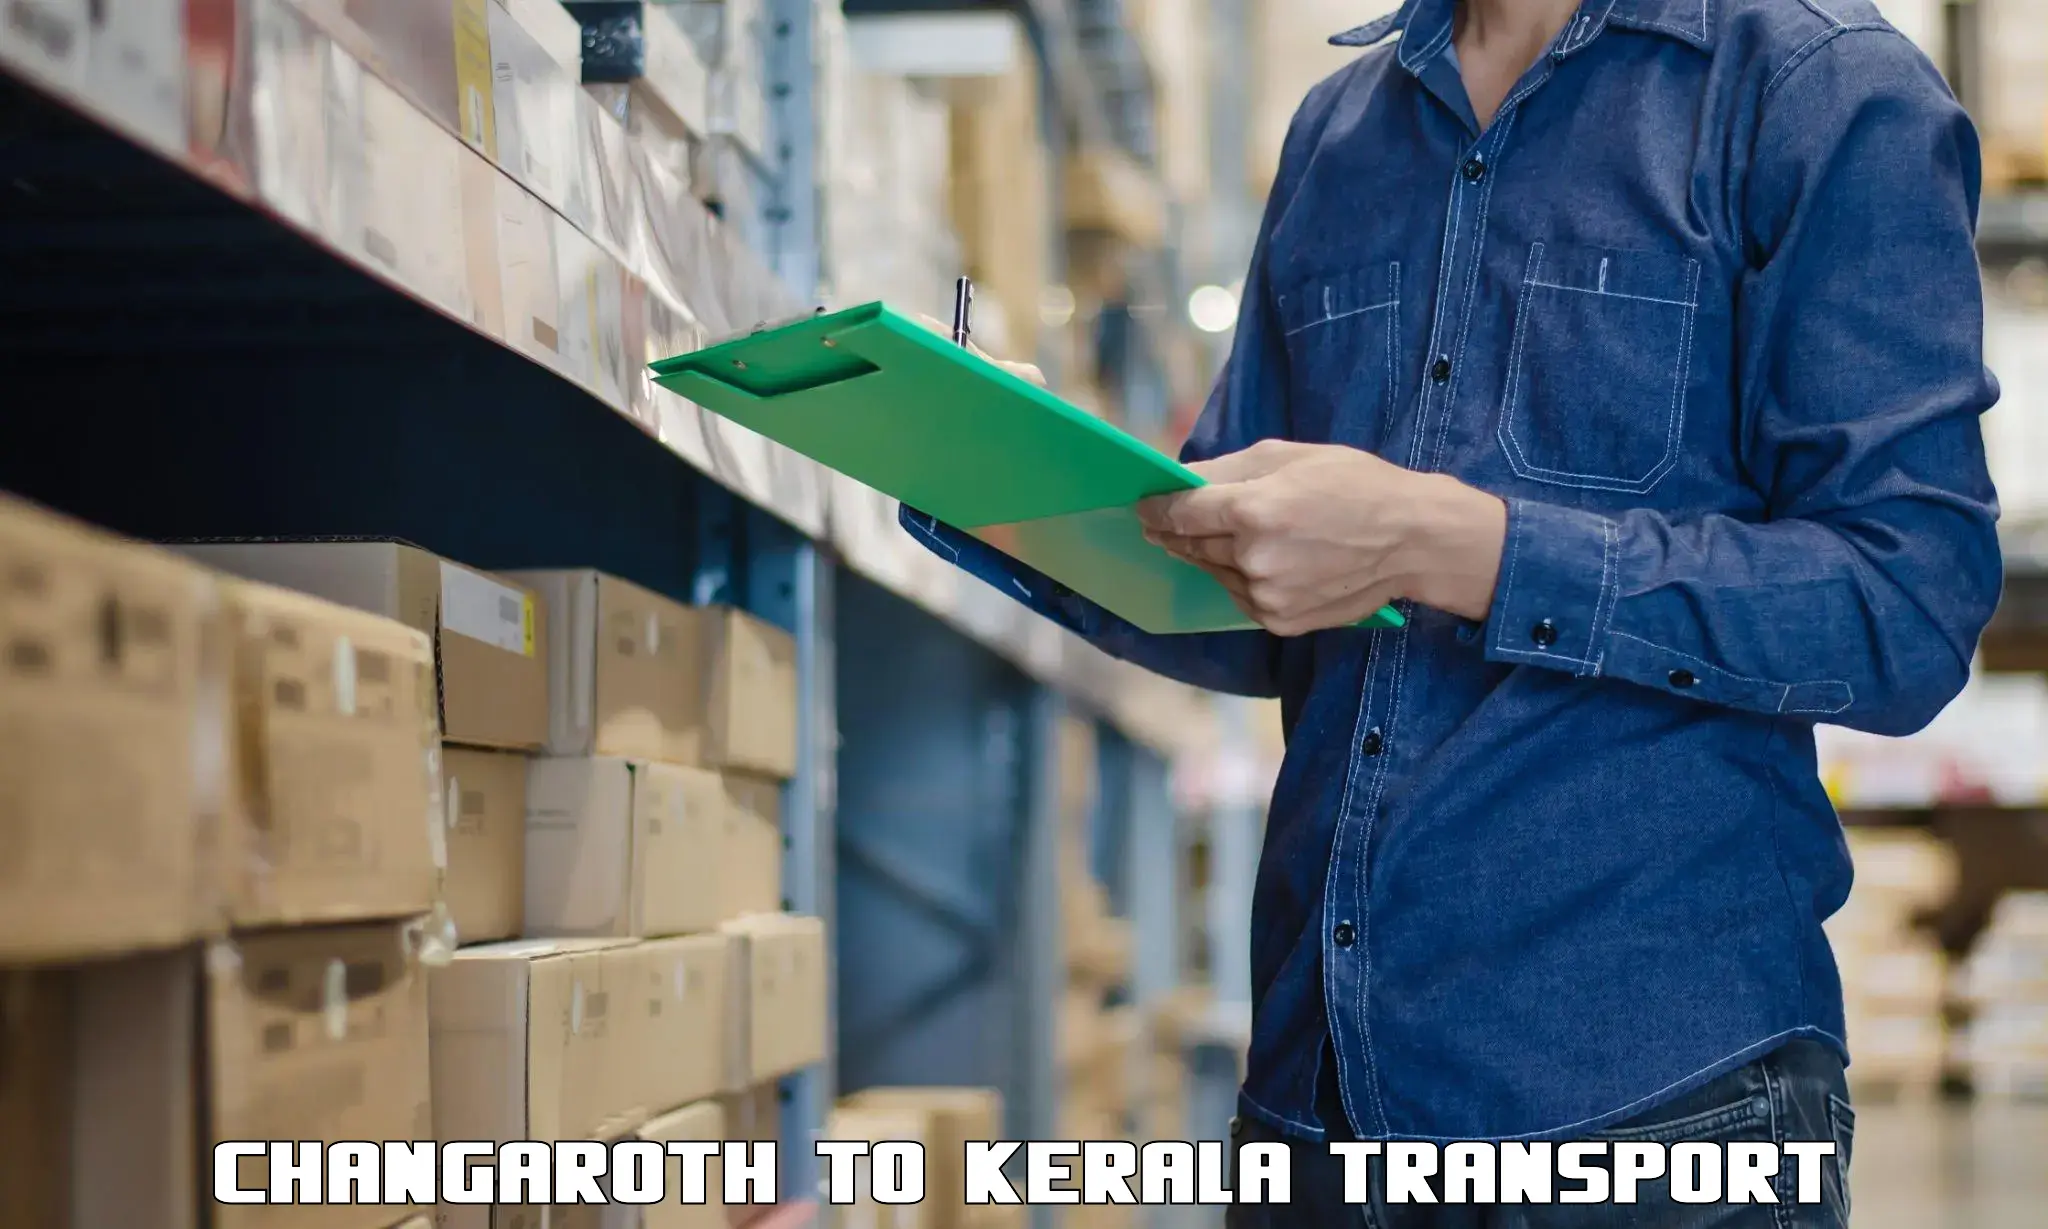 Commercial transport service Changaroth to Kerala